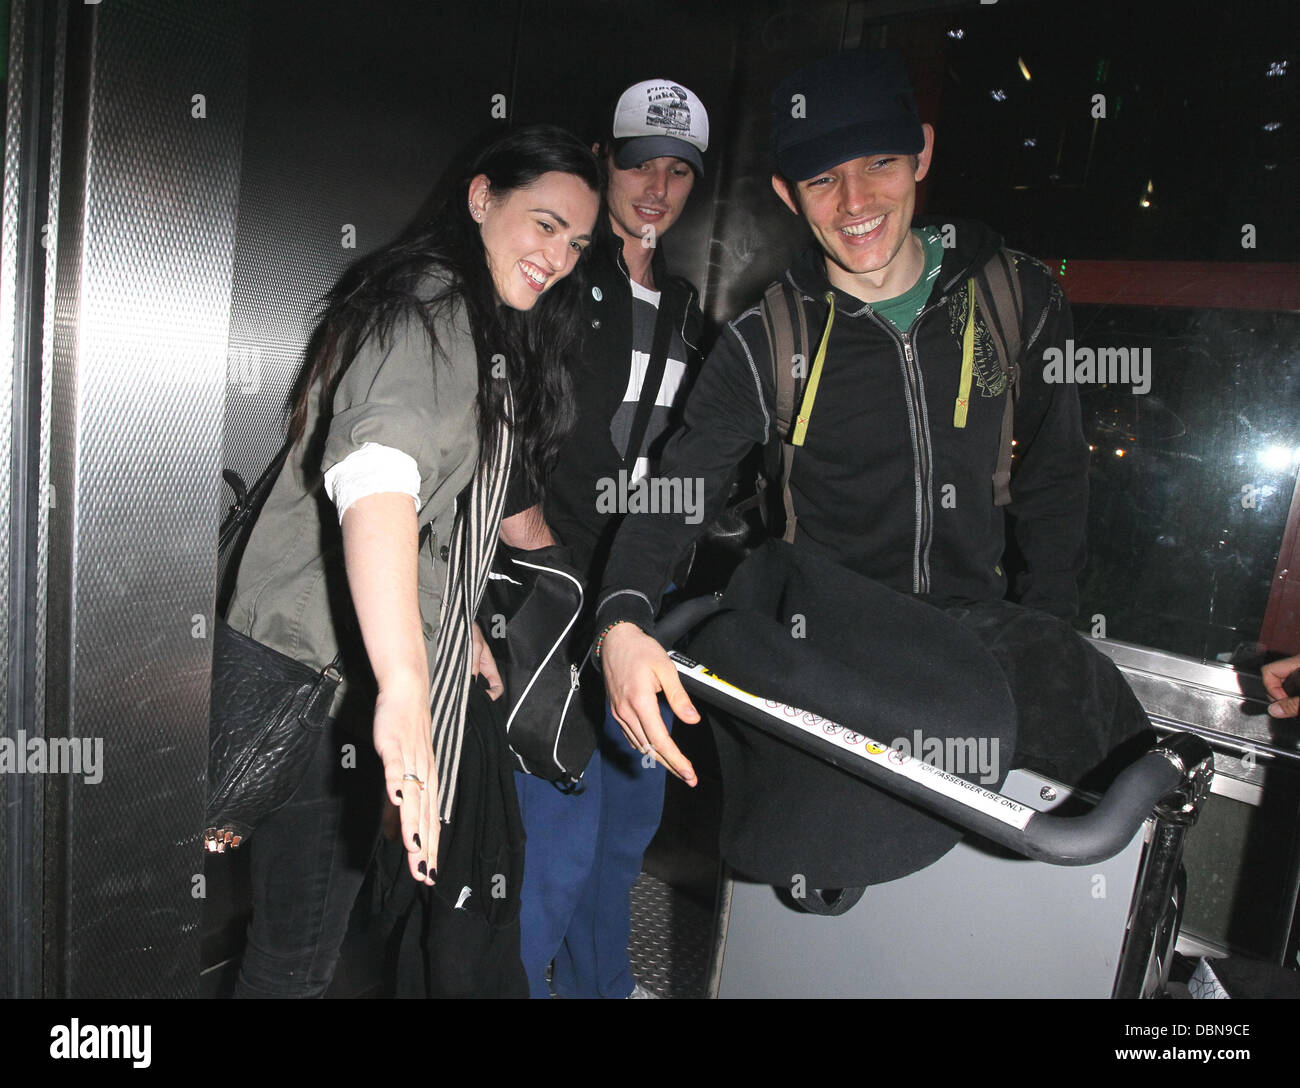 Katie McGrath, Bradley James and Colin Morgan The stars of international smash hit BBC television show 'Merlin' arrive at LAX on a flight from London Heathrow which was delayed over 4 hours from its scheduled arrival time. Los Angeles, California - 24.07.11 Stock Photo